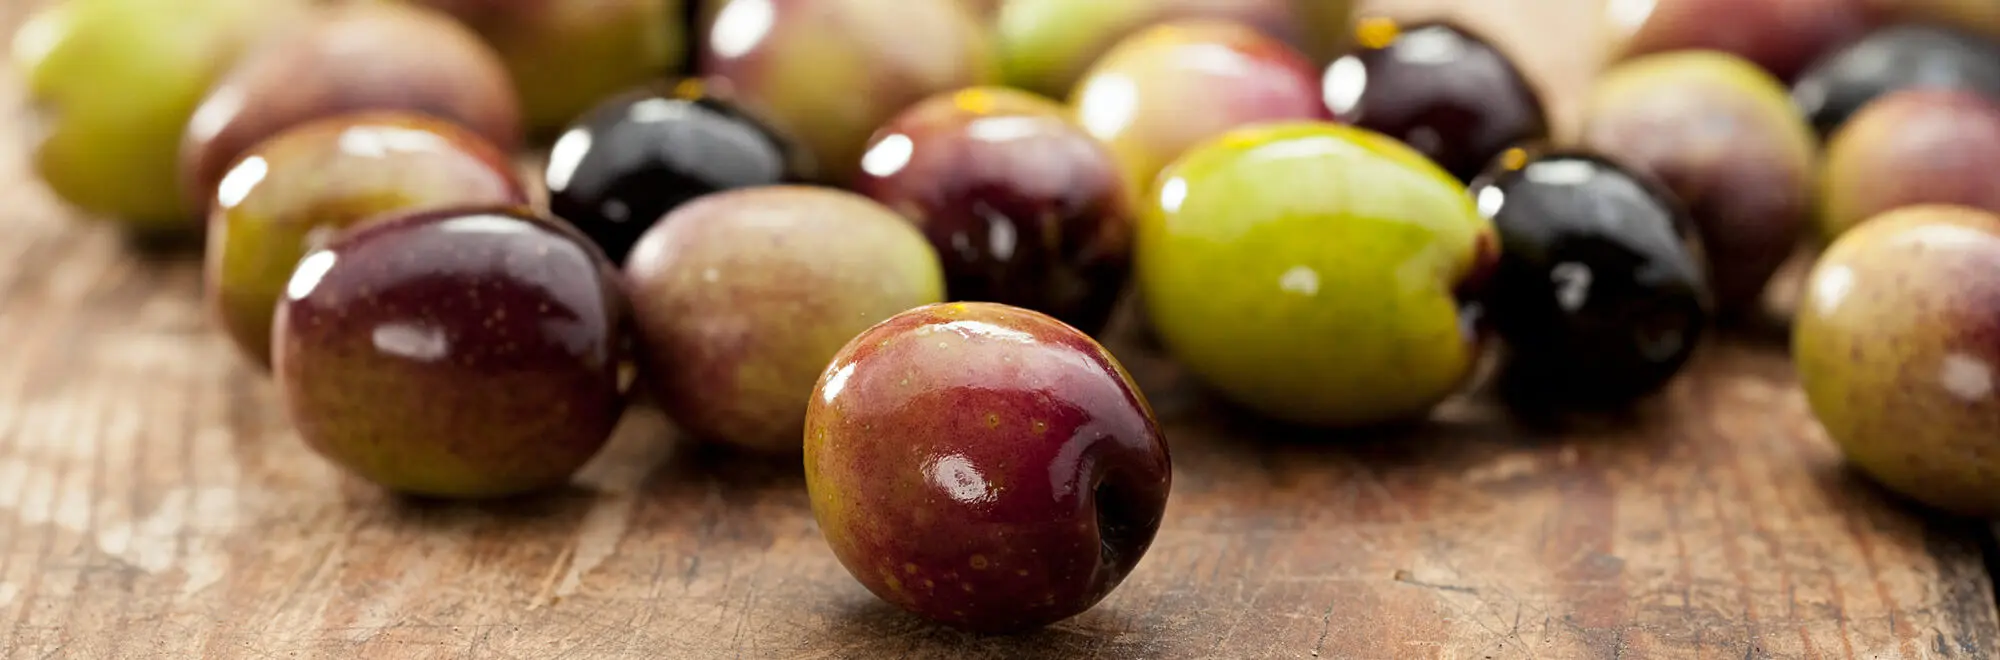 The best olive varieties according to the experts